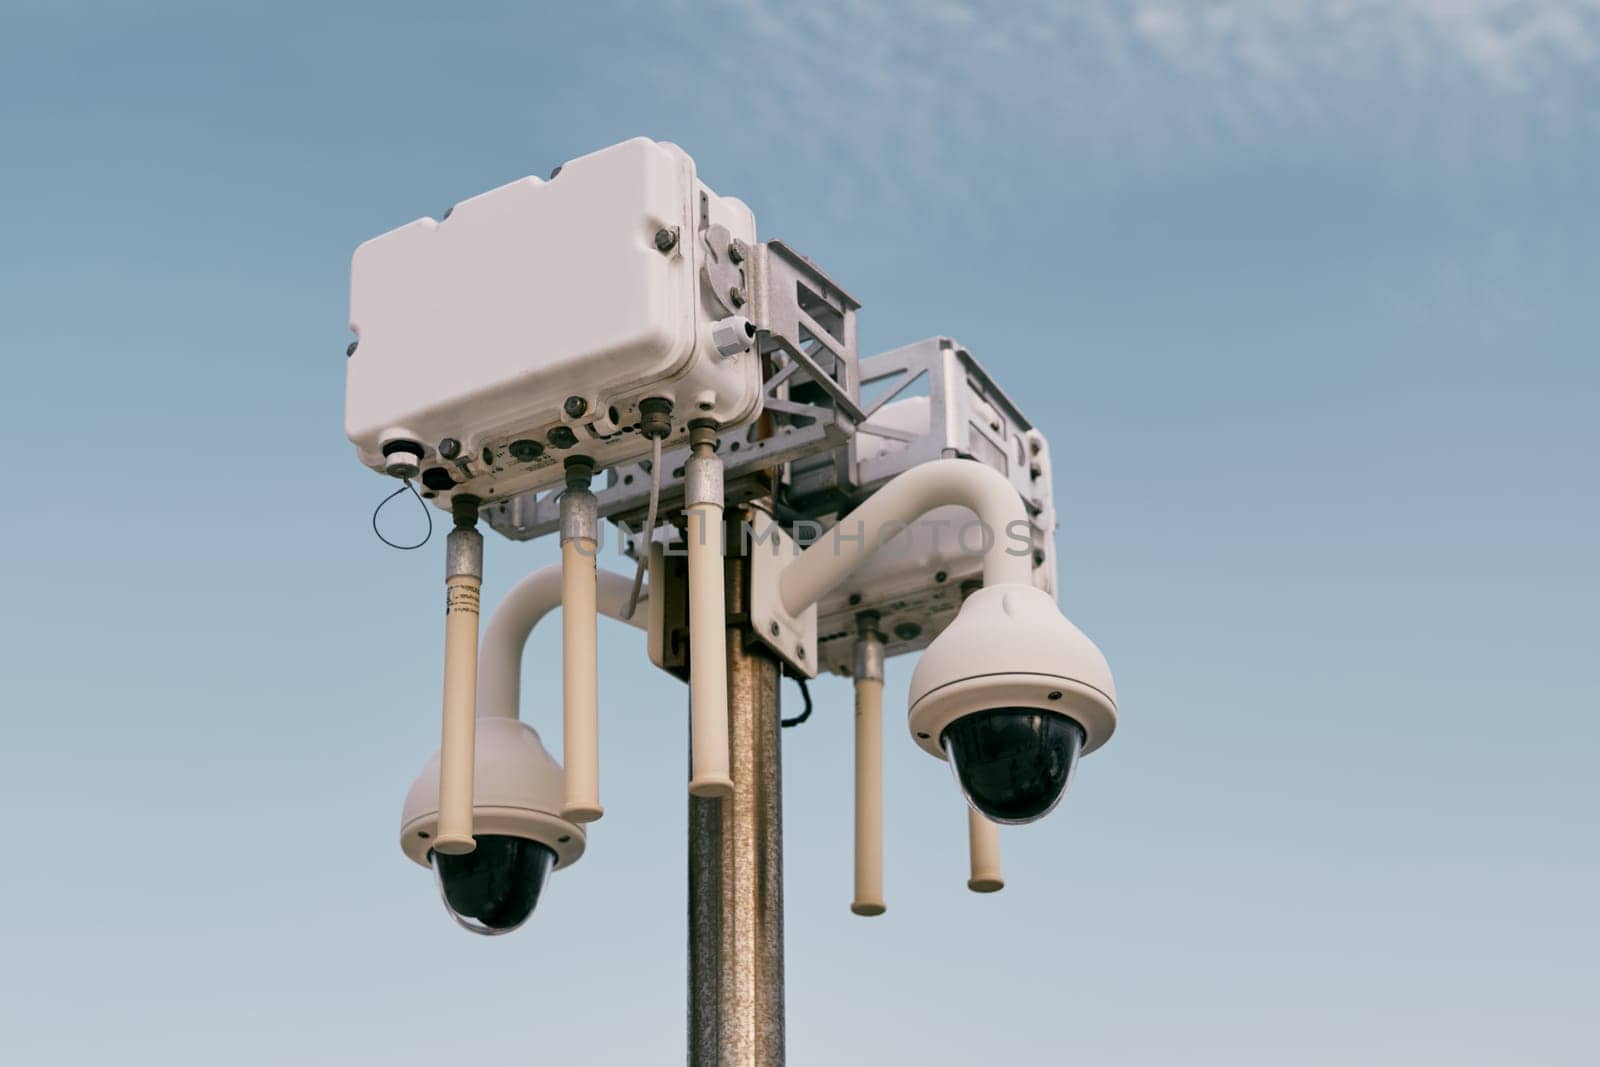 Street wi-fi router on a pole with video cameras against the sky by Nadtochiy